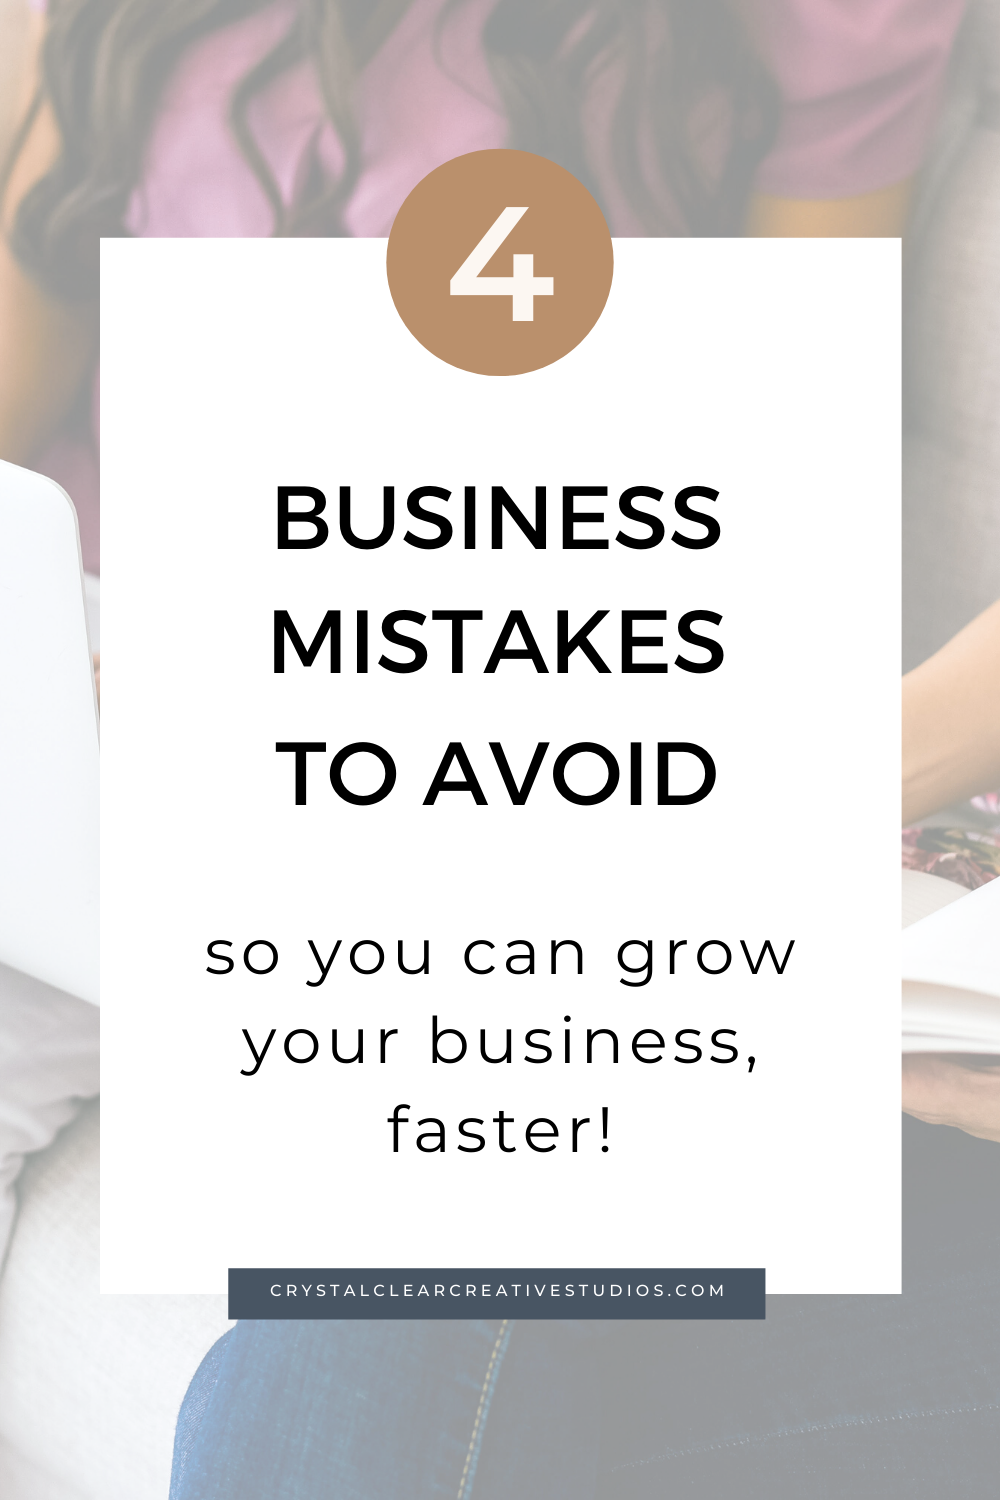 4 Business Mistakes To Avoid for Quicker Growth